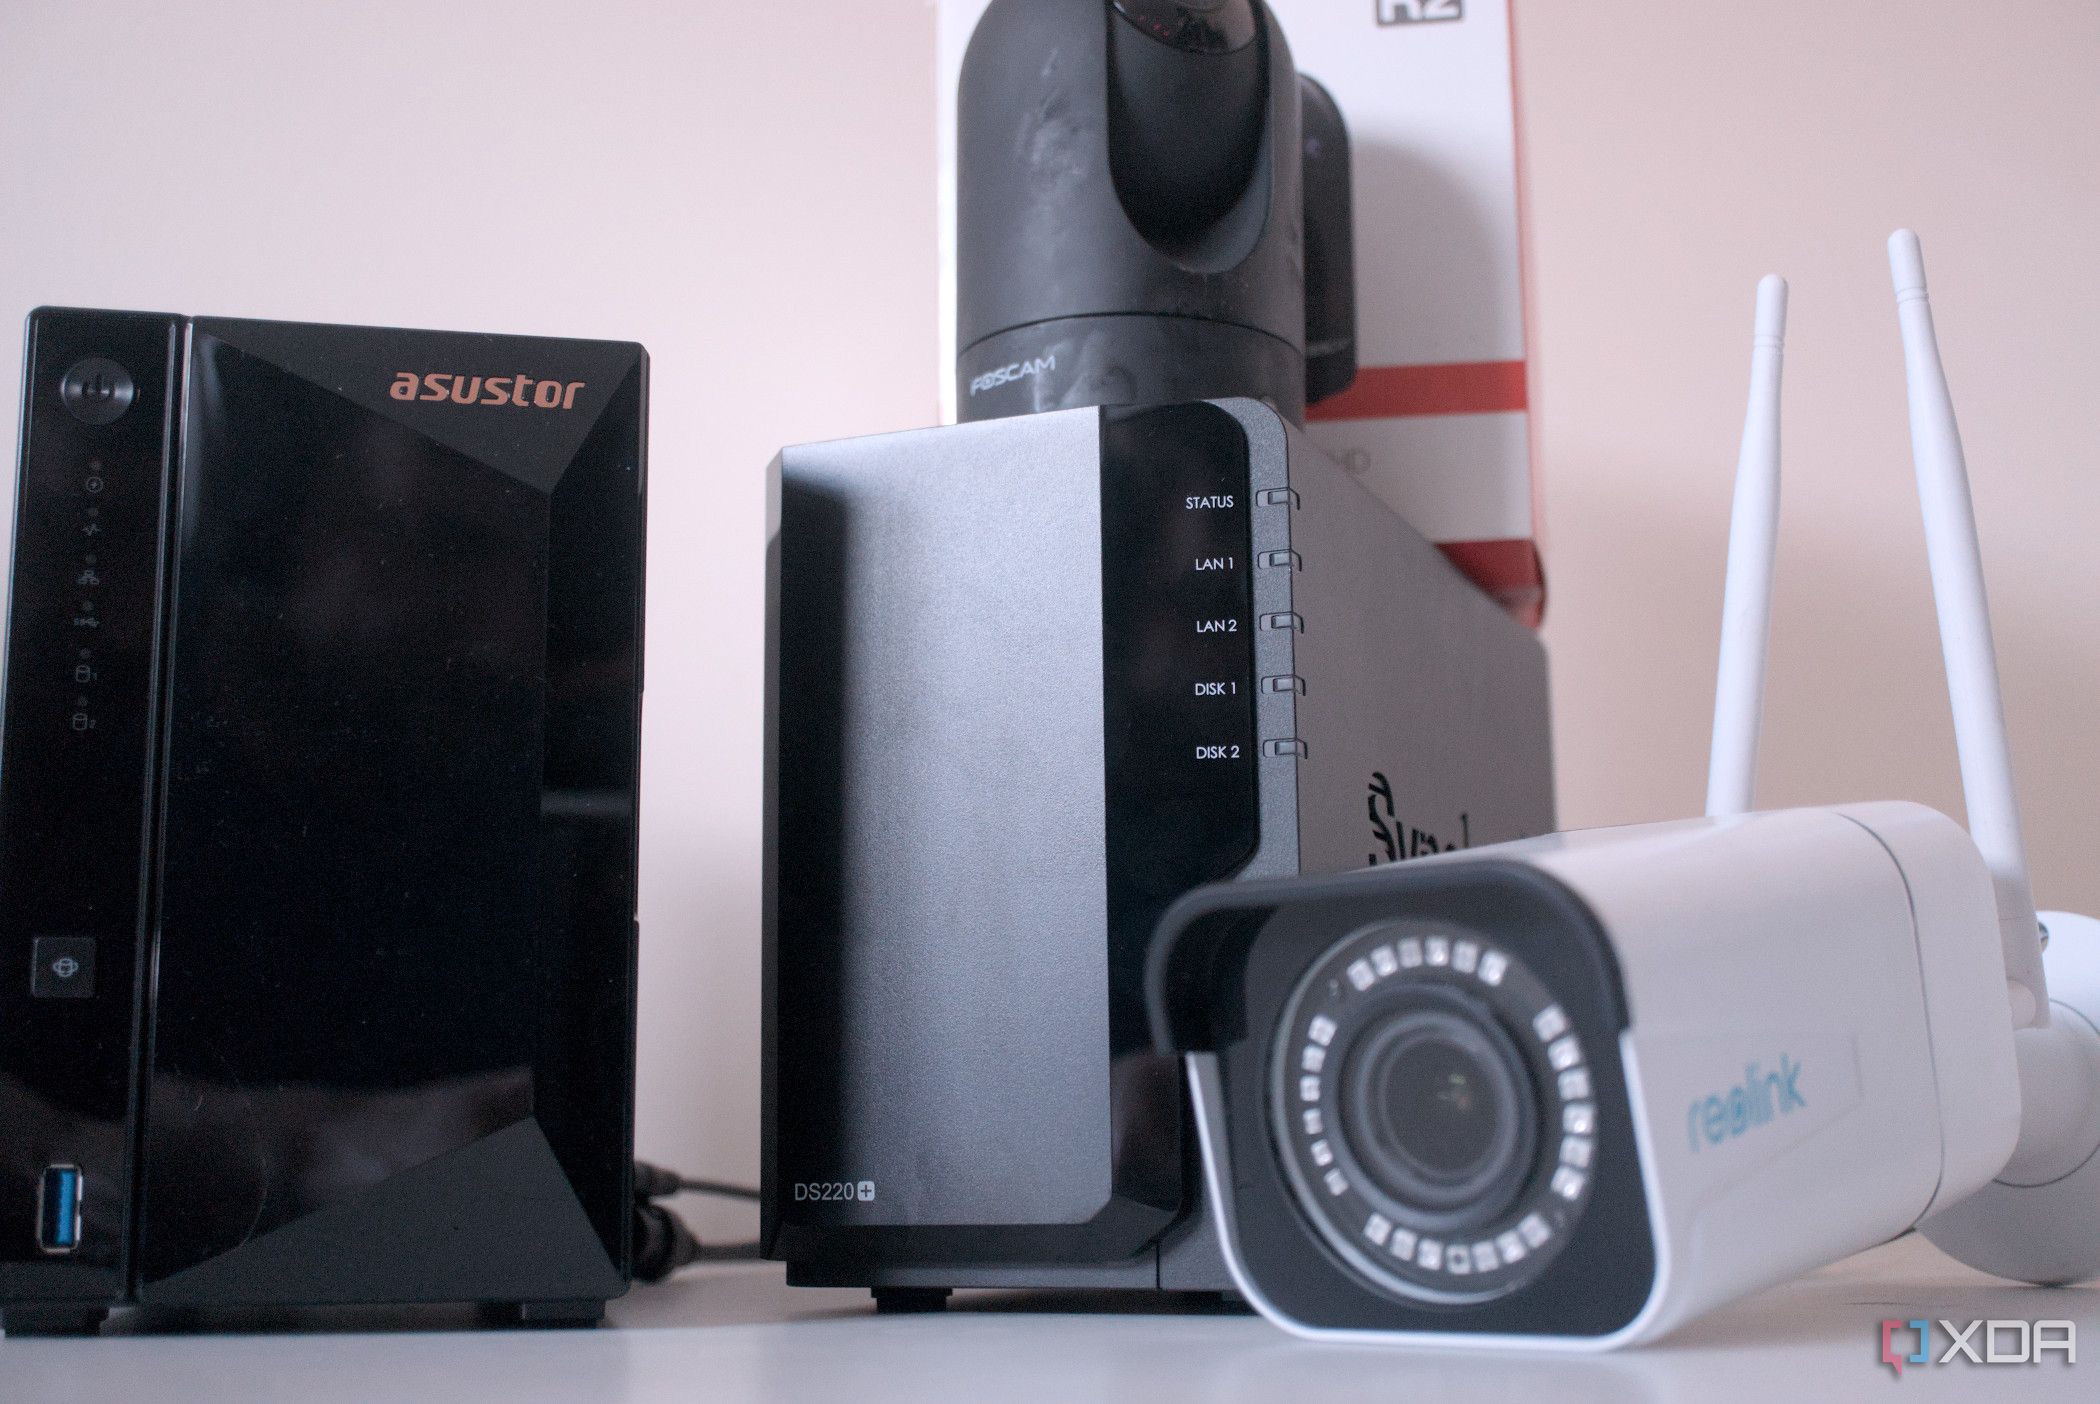 I saved money by building a NAS-powered home surveillance system